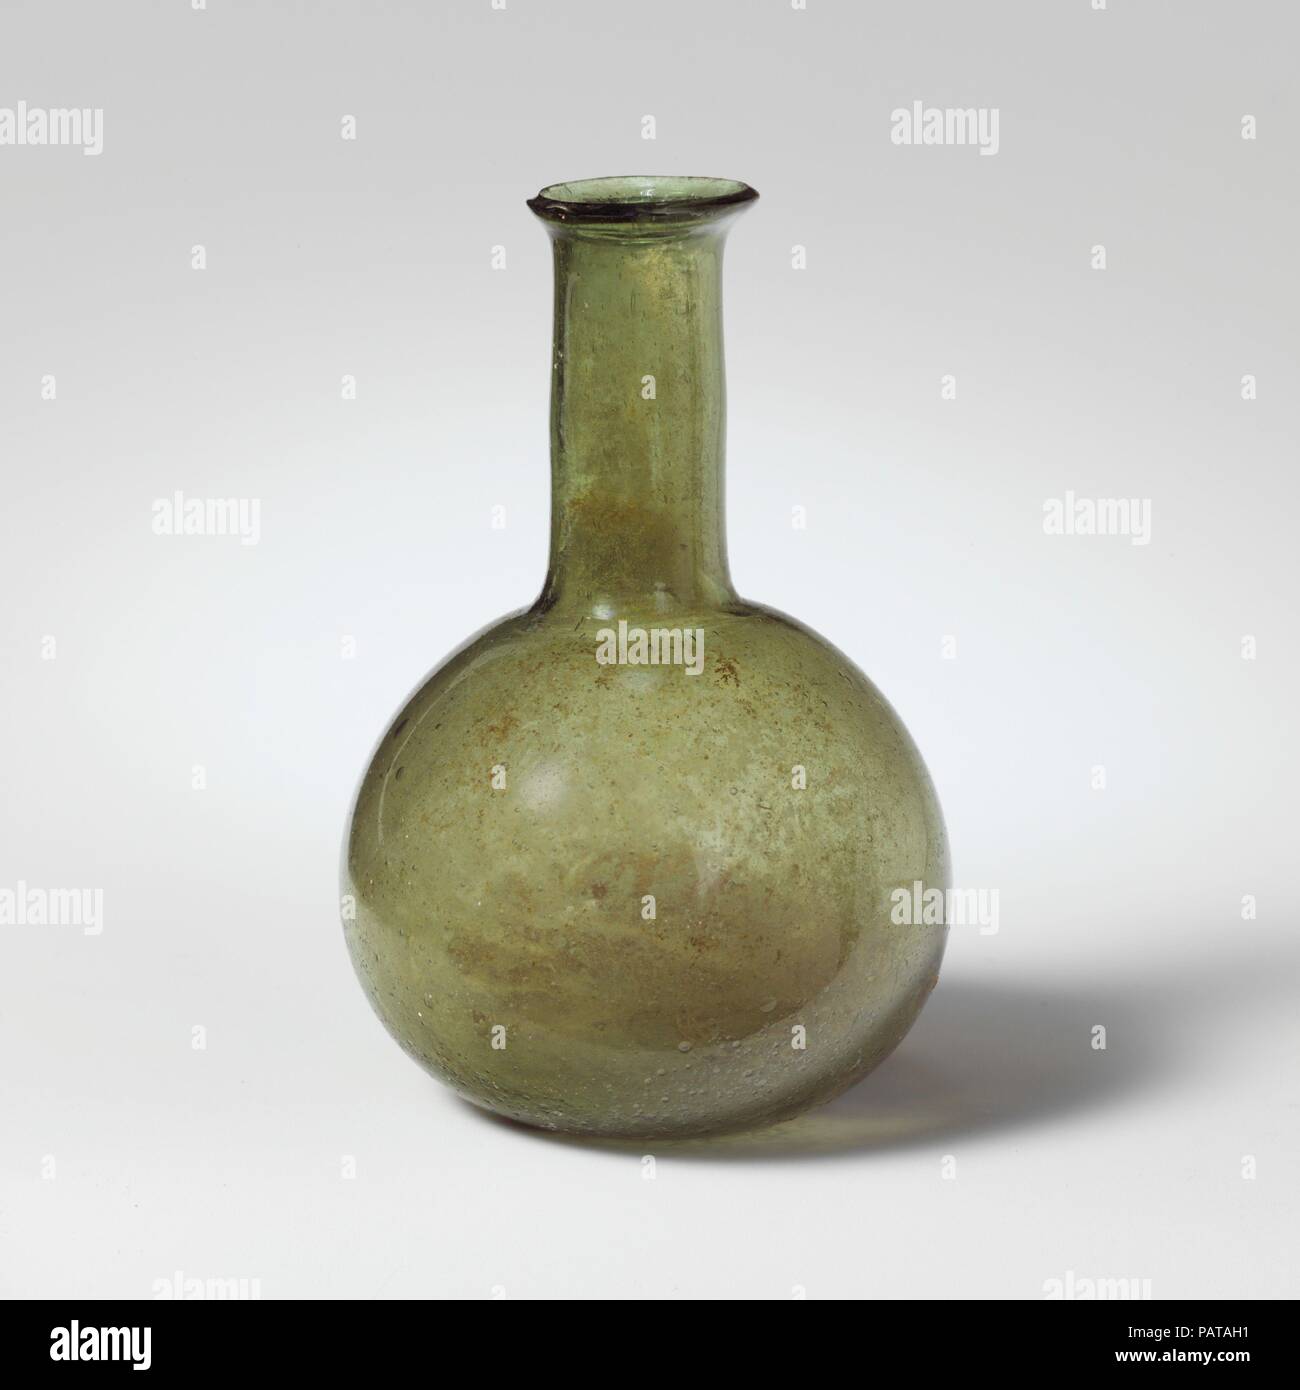 Glass perfume bottle. Culture: Roman. Dimensions: 3 3/16 in. (8.1 cm)  Diameter: 2 1/16 x 13/16 in. (5.2 x 2.1 cm). Date: 3rd century A.D. or later.  Translucent green.  Rim folded out with beveled lip; tall cylindrical neck; globular body; flattened bottom with large circular pontil mark.  Intact; many pinprick and larger bubbles; faint iridescence on exterior; patches of weathering and soil encrustation on interior. Museum: Metropolitan Museum of Art, New York, USA. Stock Photo